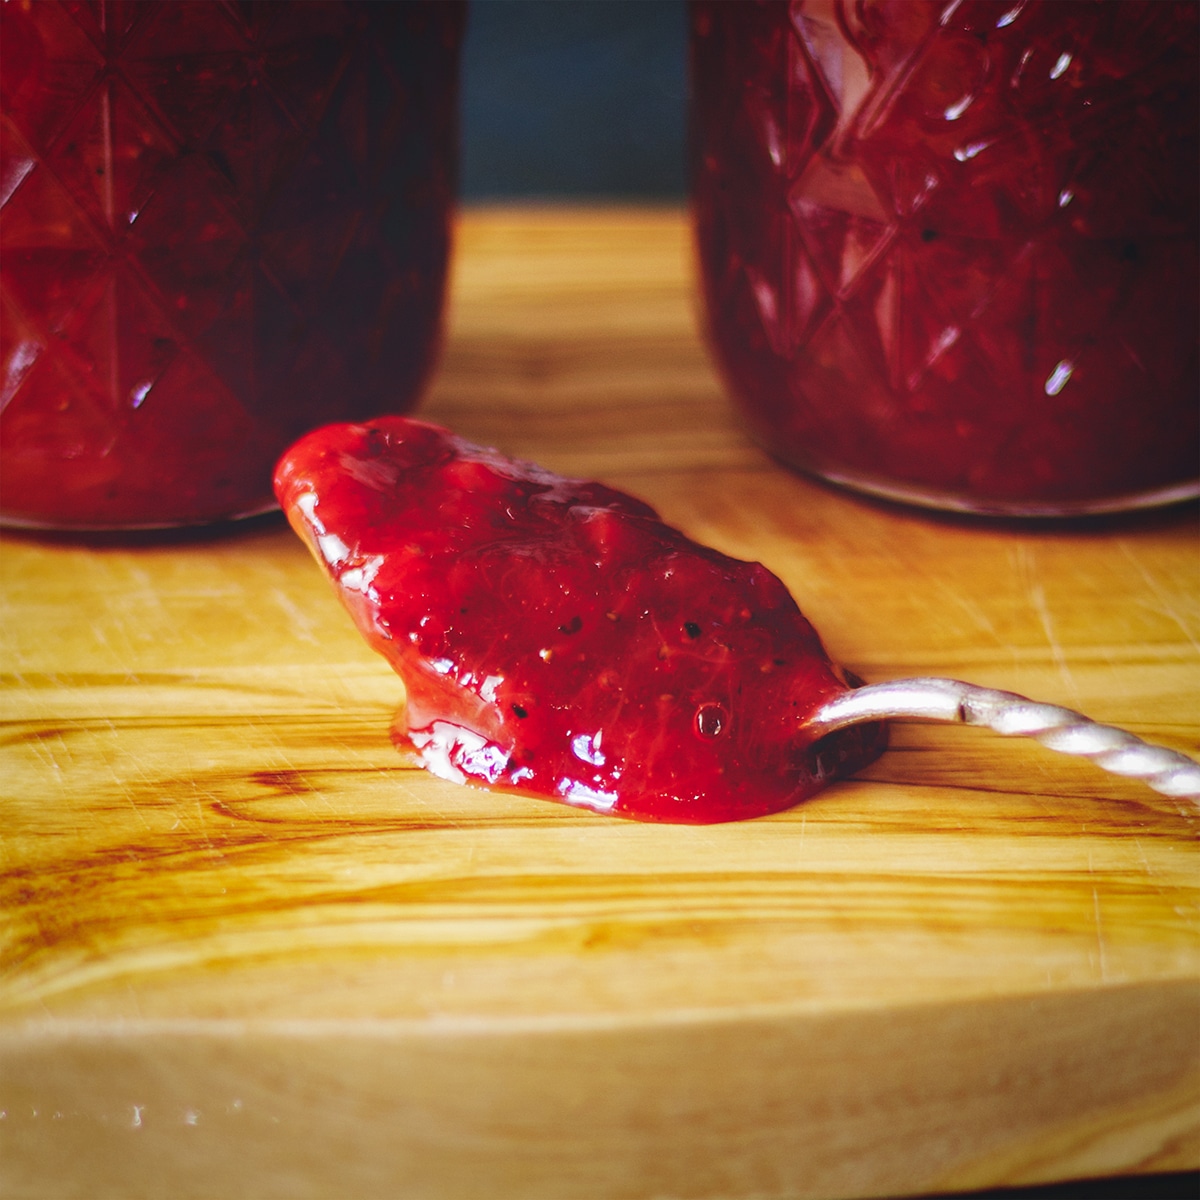 A spoonful of homemade strawberry rhubarb jam that's thick enough to cling to the spoon.